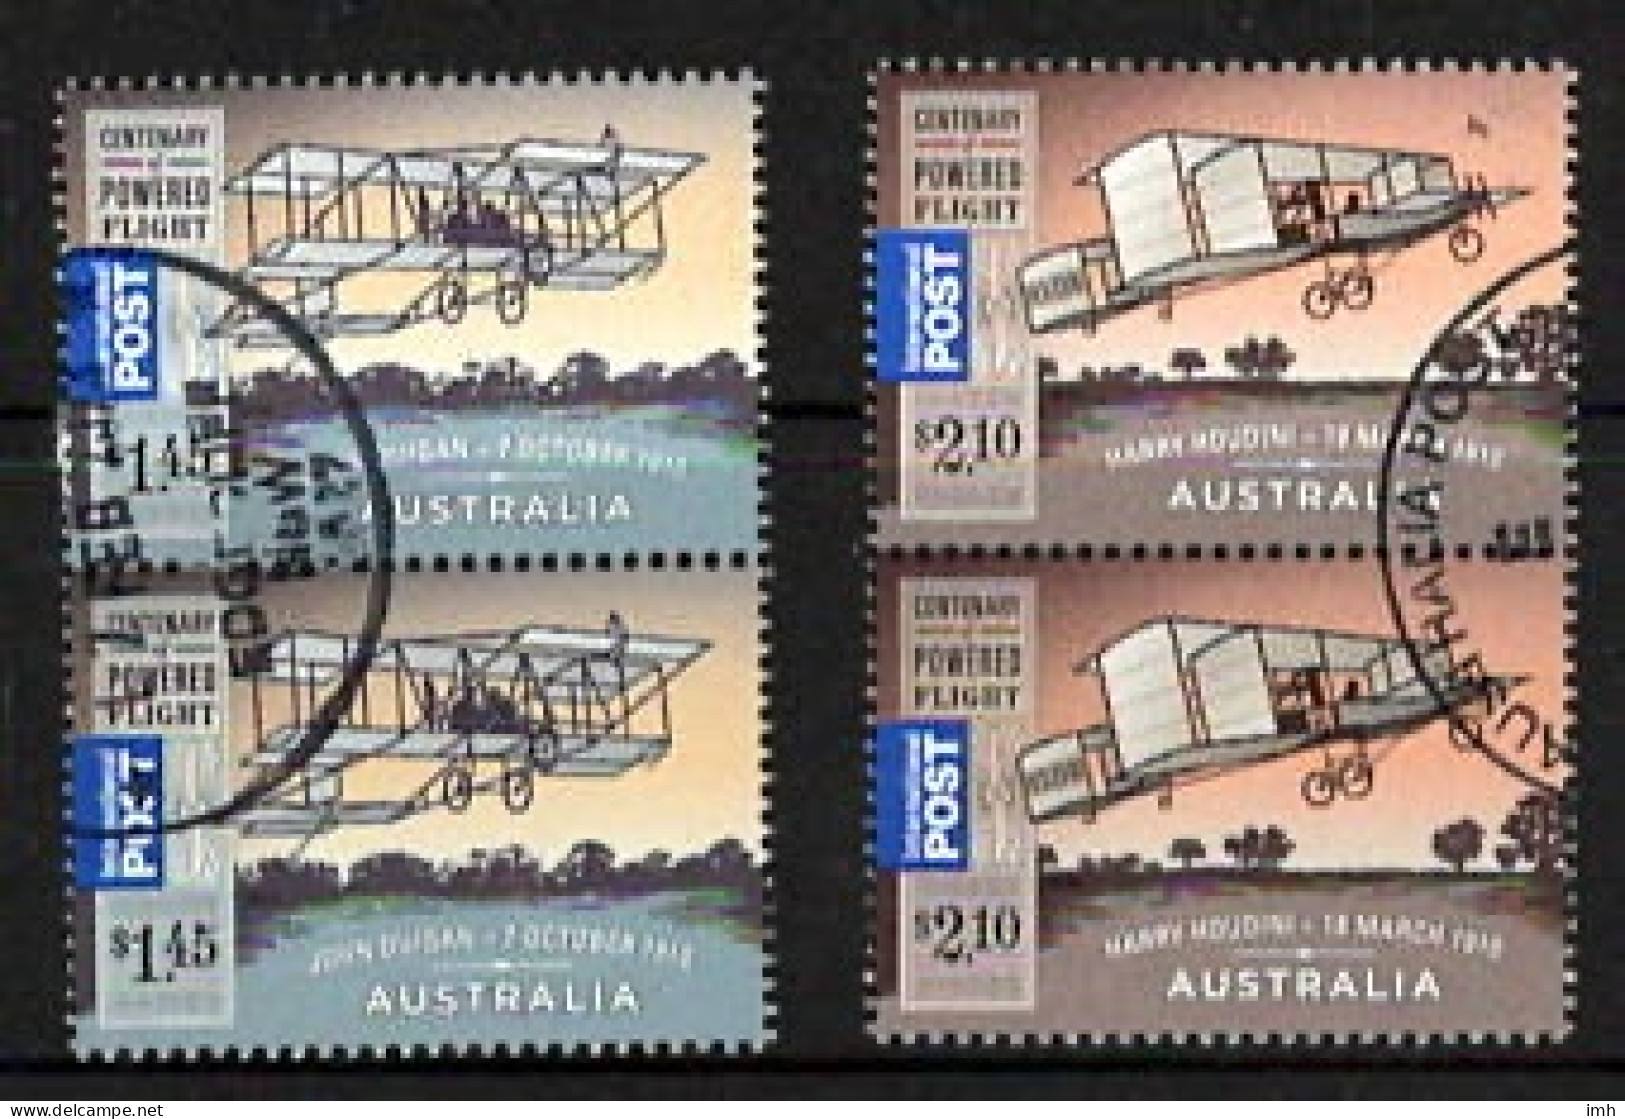 2010 Australia   Powered Flight, $1.45 And $2.10 Values In Used Pairs.   Fine Used. - Used Stamps